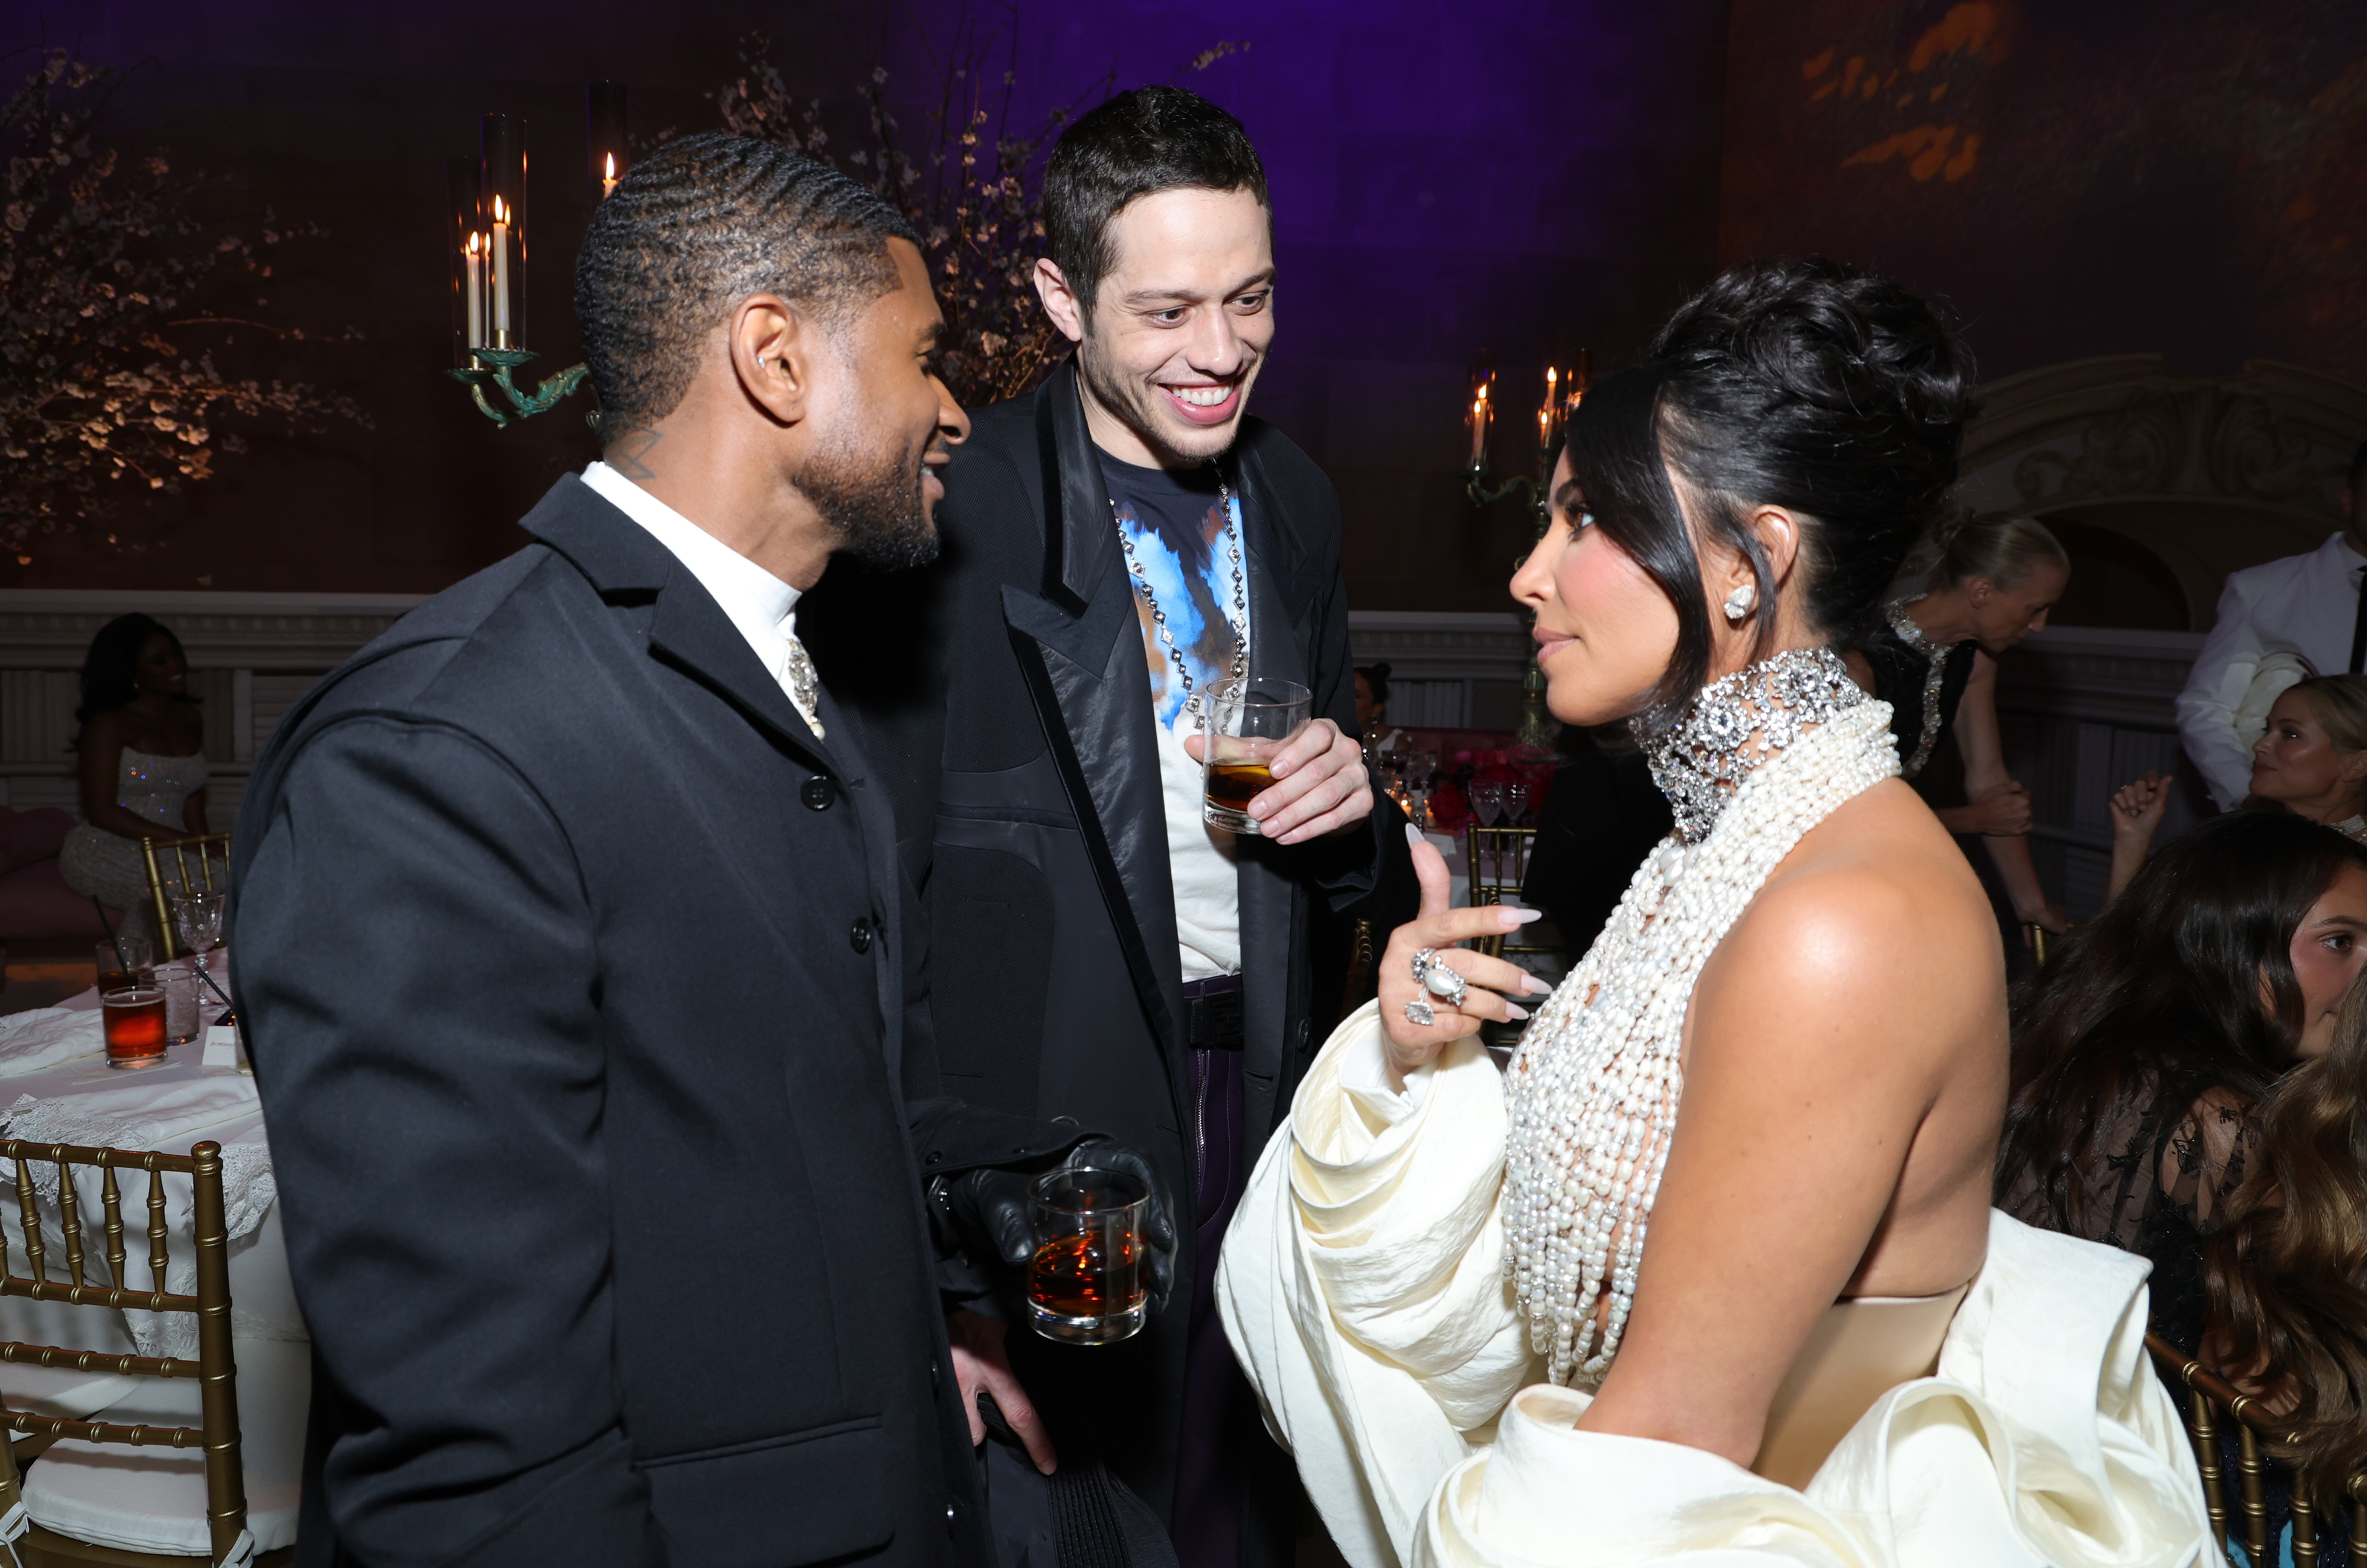 Kim talking to Usher and Pete Davidson at an event